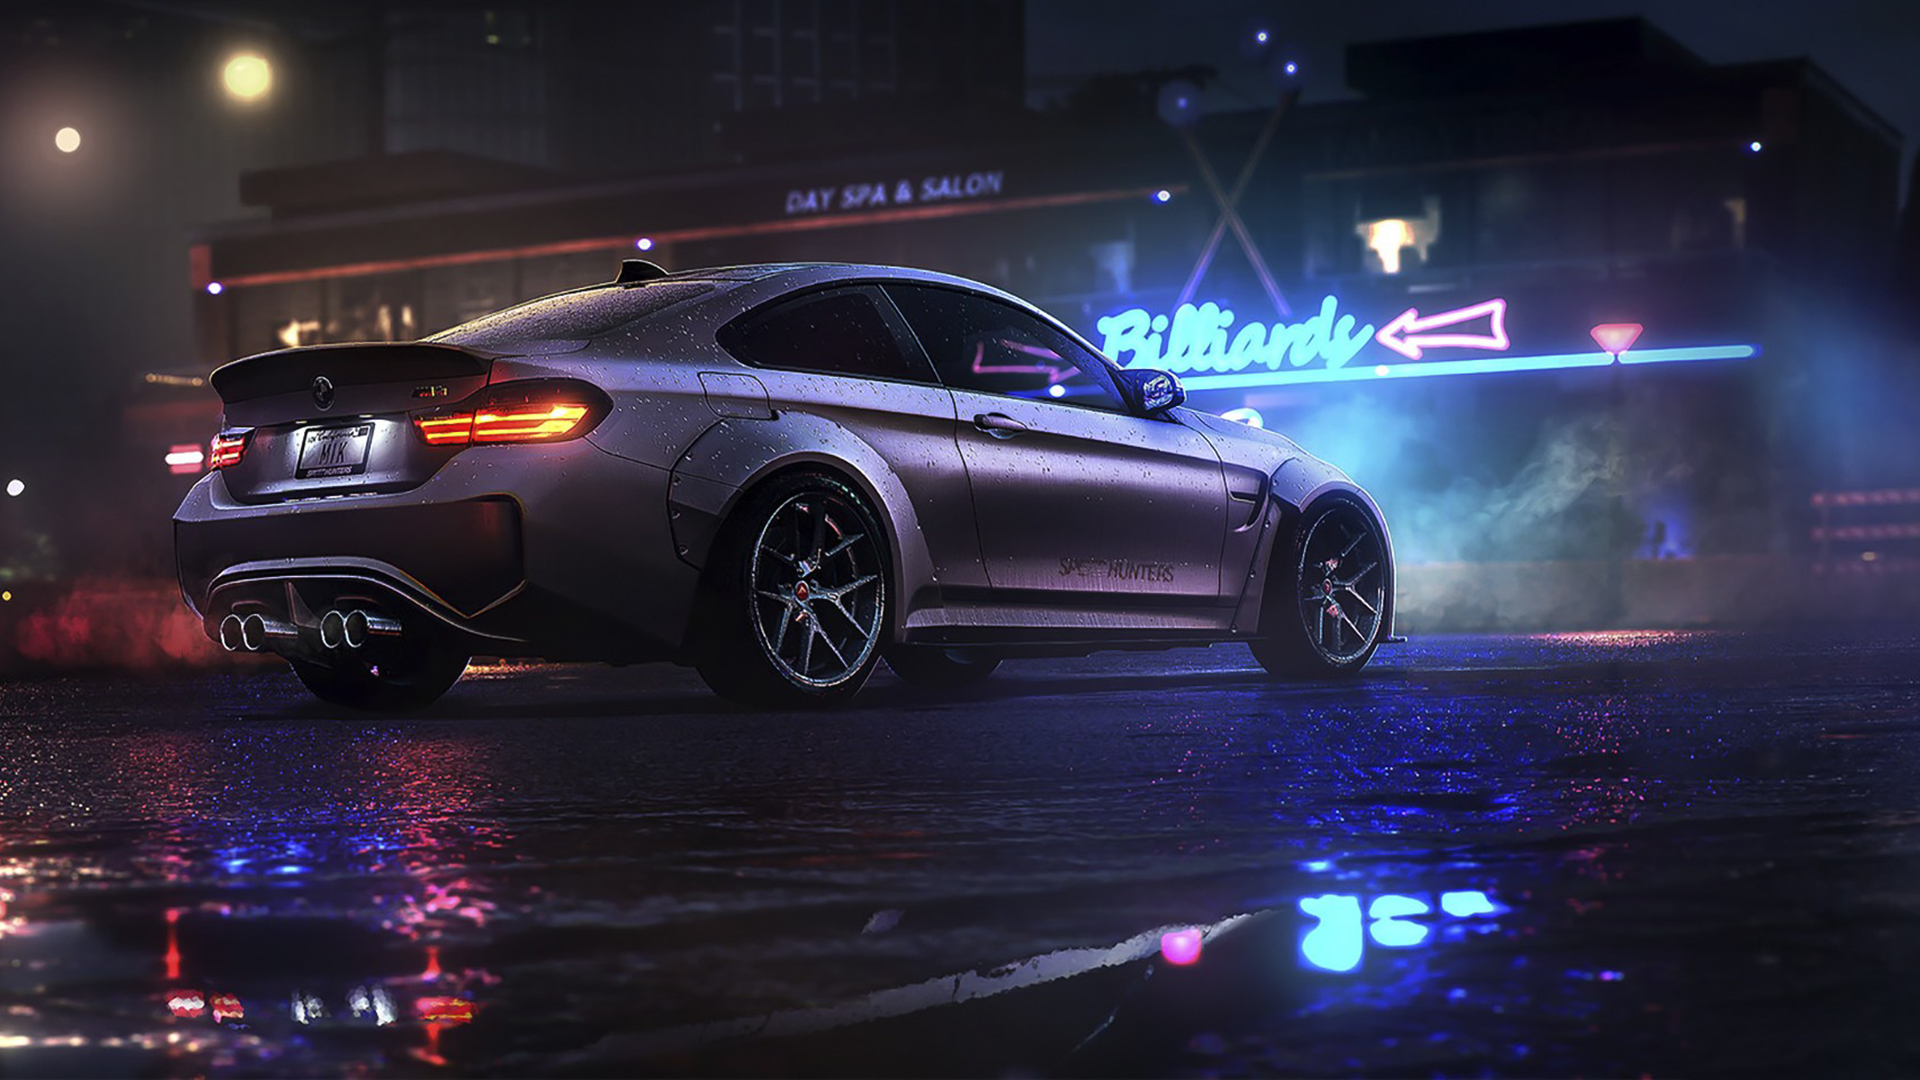 Download 1920x1080 Bmw, Side View, Water Drops, Night, Sport, Cars Wallpaper for Widescreen